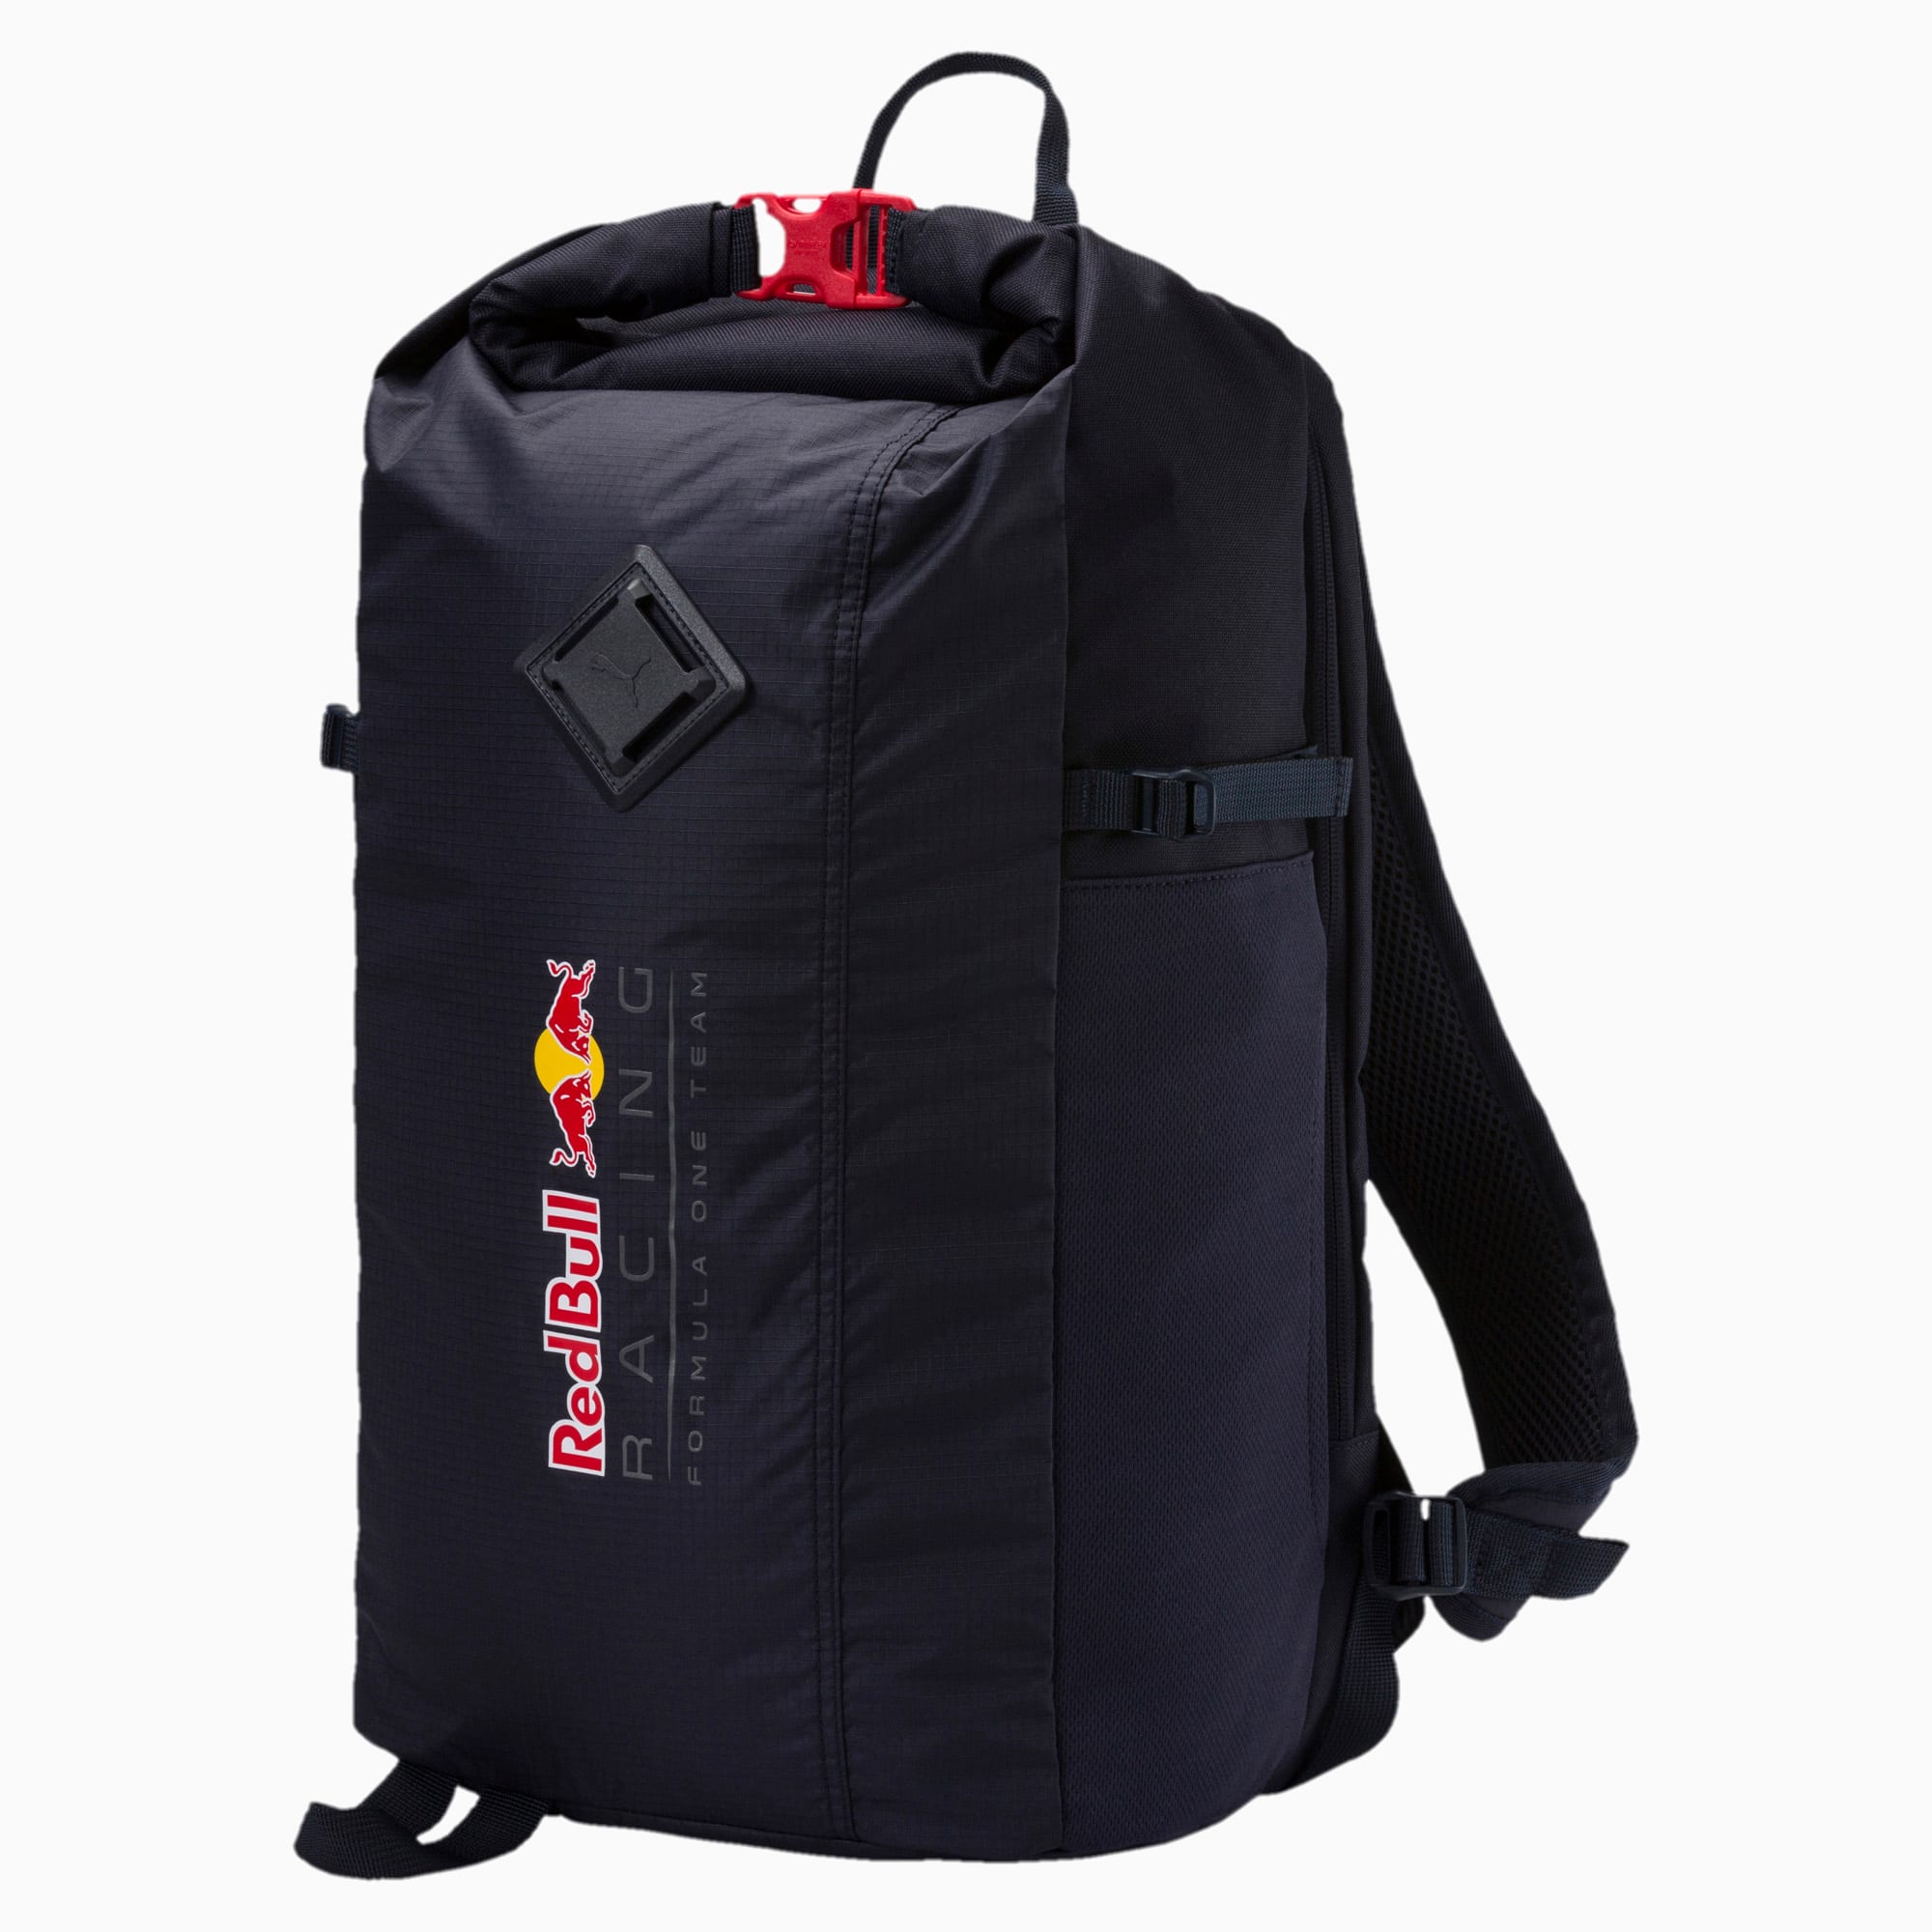 PUMA Red Bull Racing Lifestyle Backpack, Noir/Rouge, Accessoires